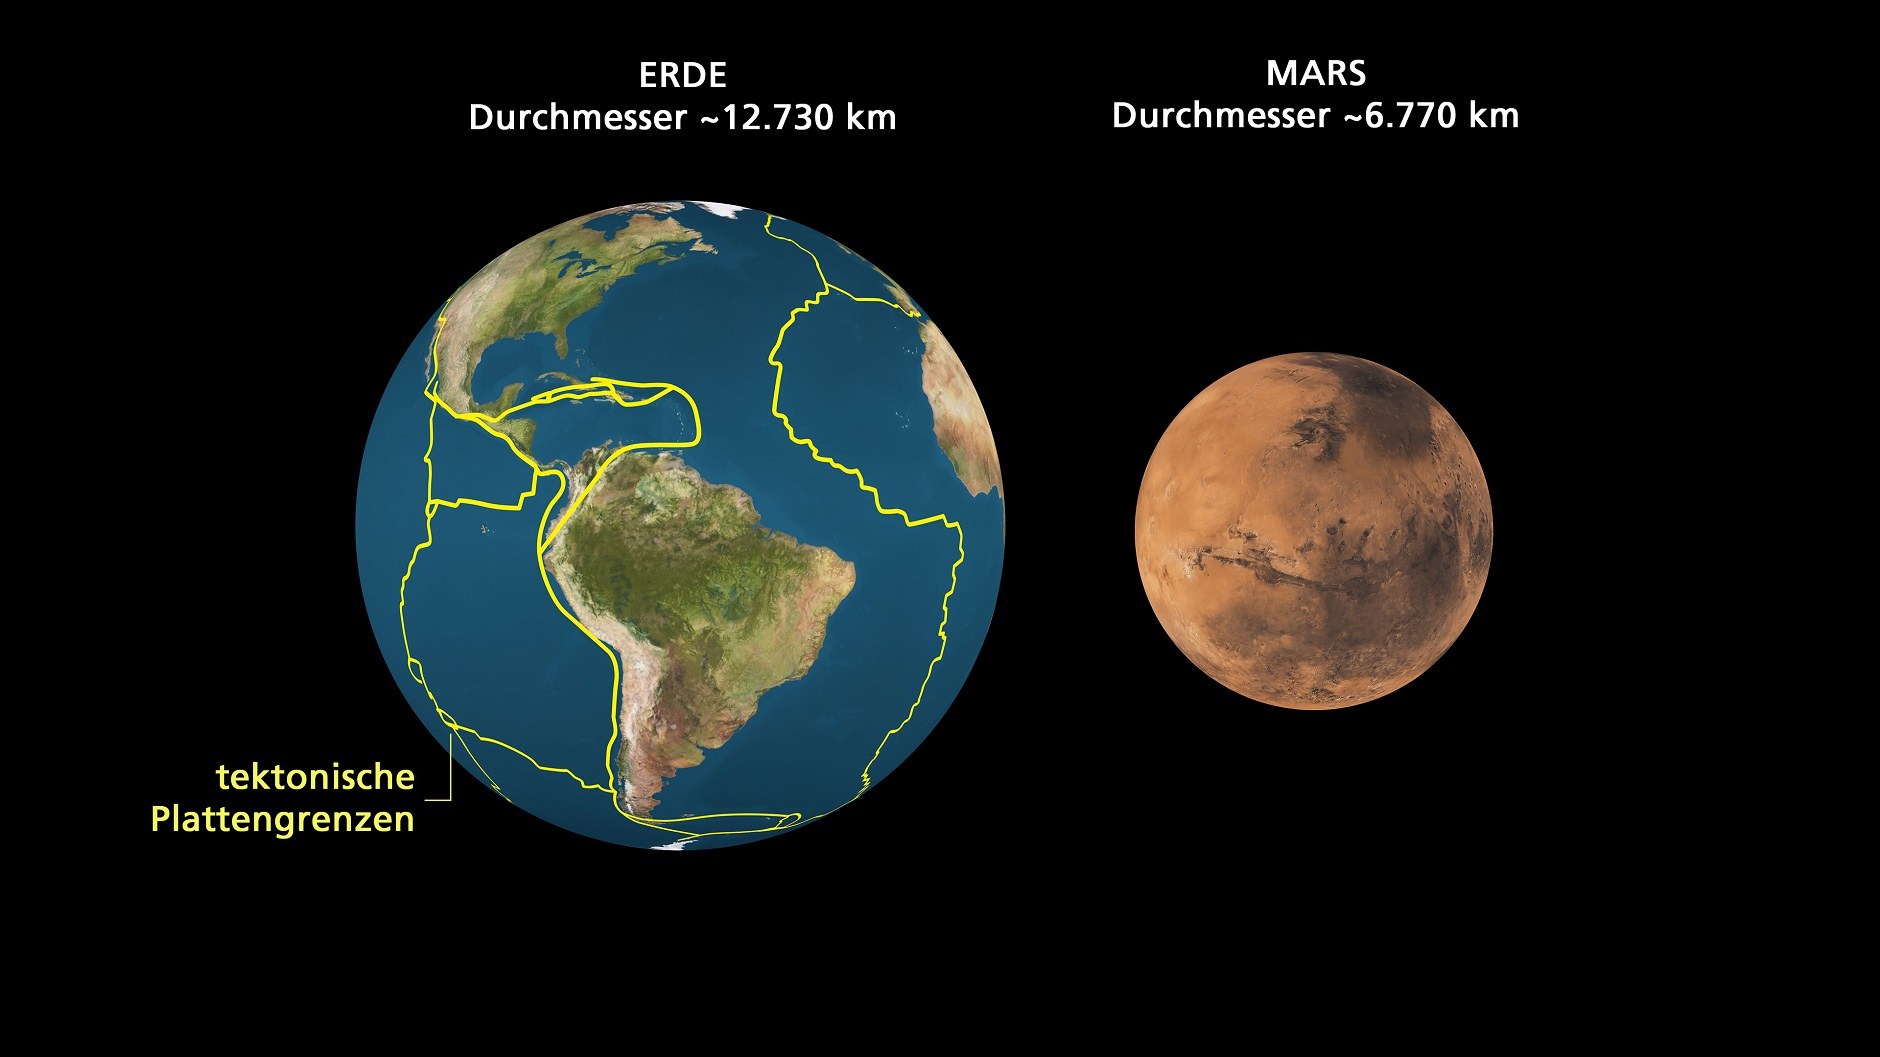 Comparing Earth and Mars